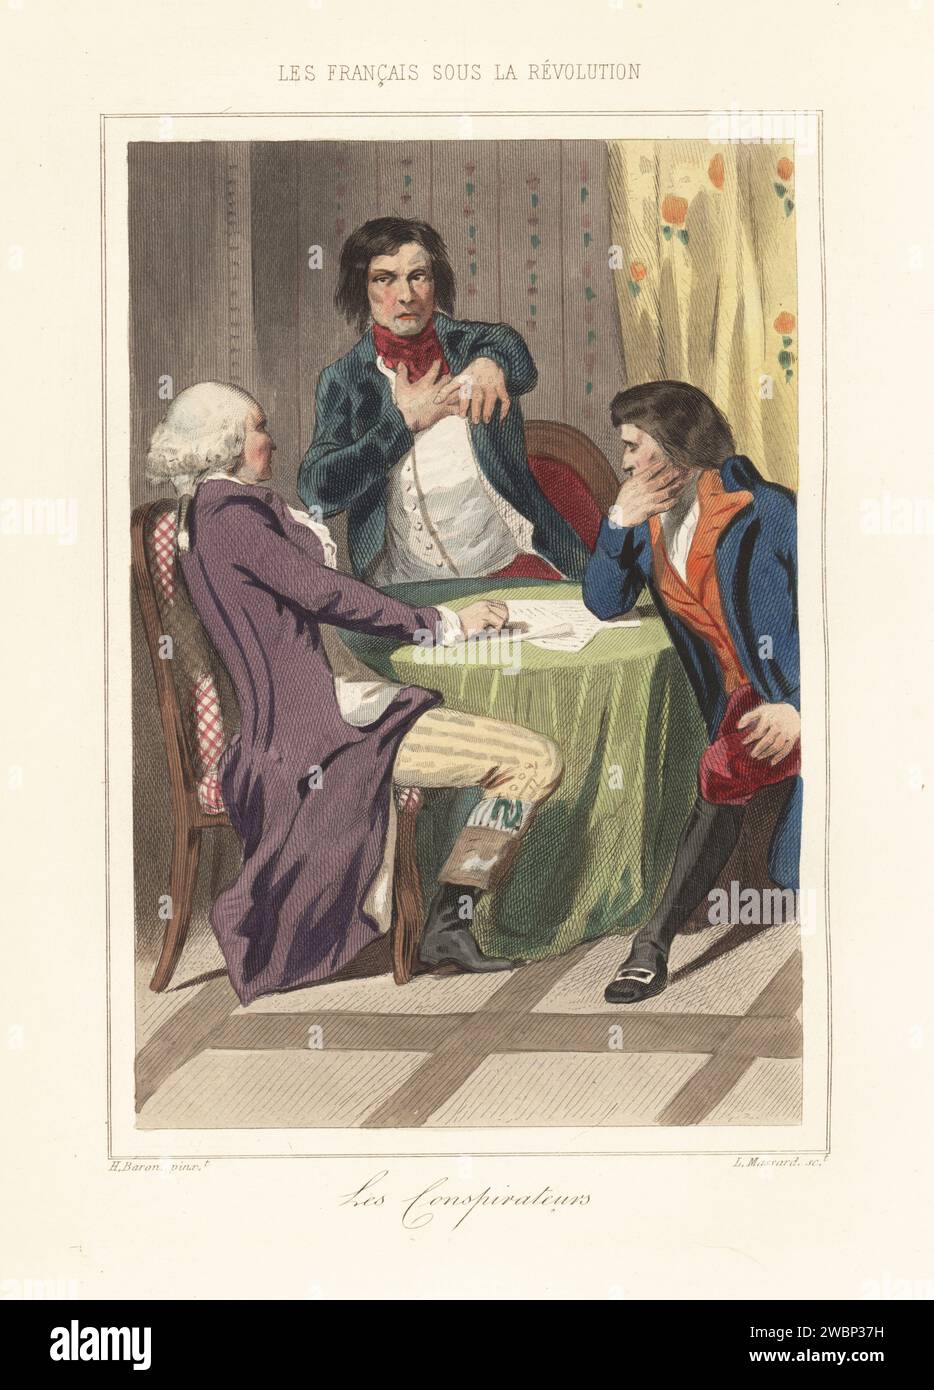 Royalist conspirators during the French Revolution. Three pro-monarchist insurgents seated at a table. Anti-revolutionary activists joined the Club Monarchique, des Poignards (Daggers), Baron de Batz, etc. to foment insurrection. Les Conspirateurs. Handcoloured steel engraving by Leopold Massard after an illustration by Henri Baron from Augustin Challamel and Wilhelm Tenint’s Les Francais sous la Revolution, The French under the Revolution, Challamel, Paris, 1843. Stock Photo